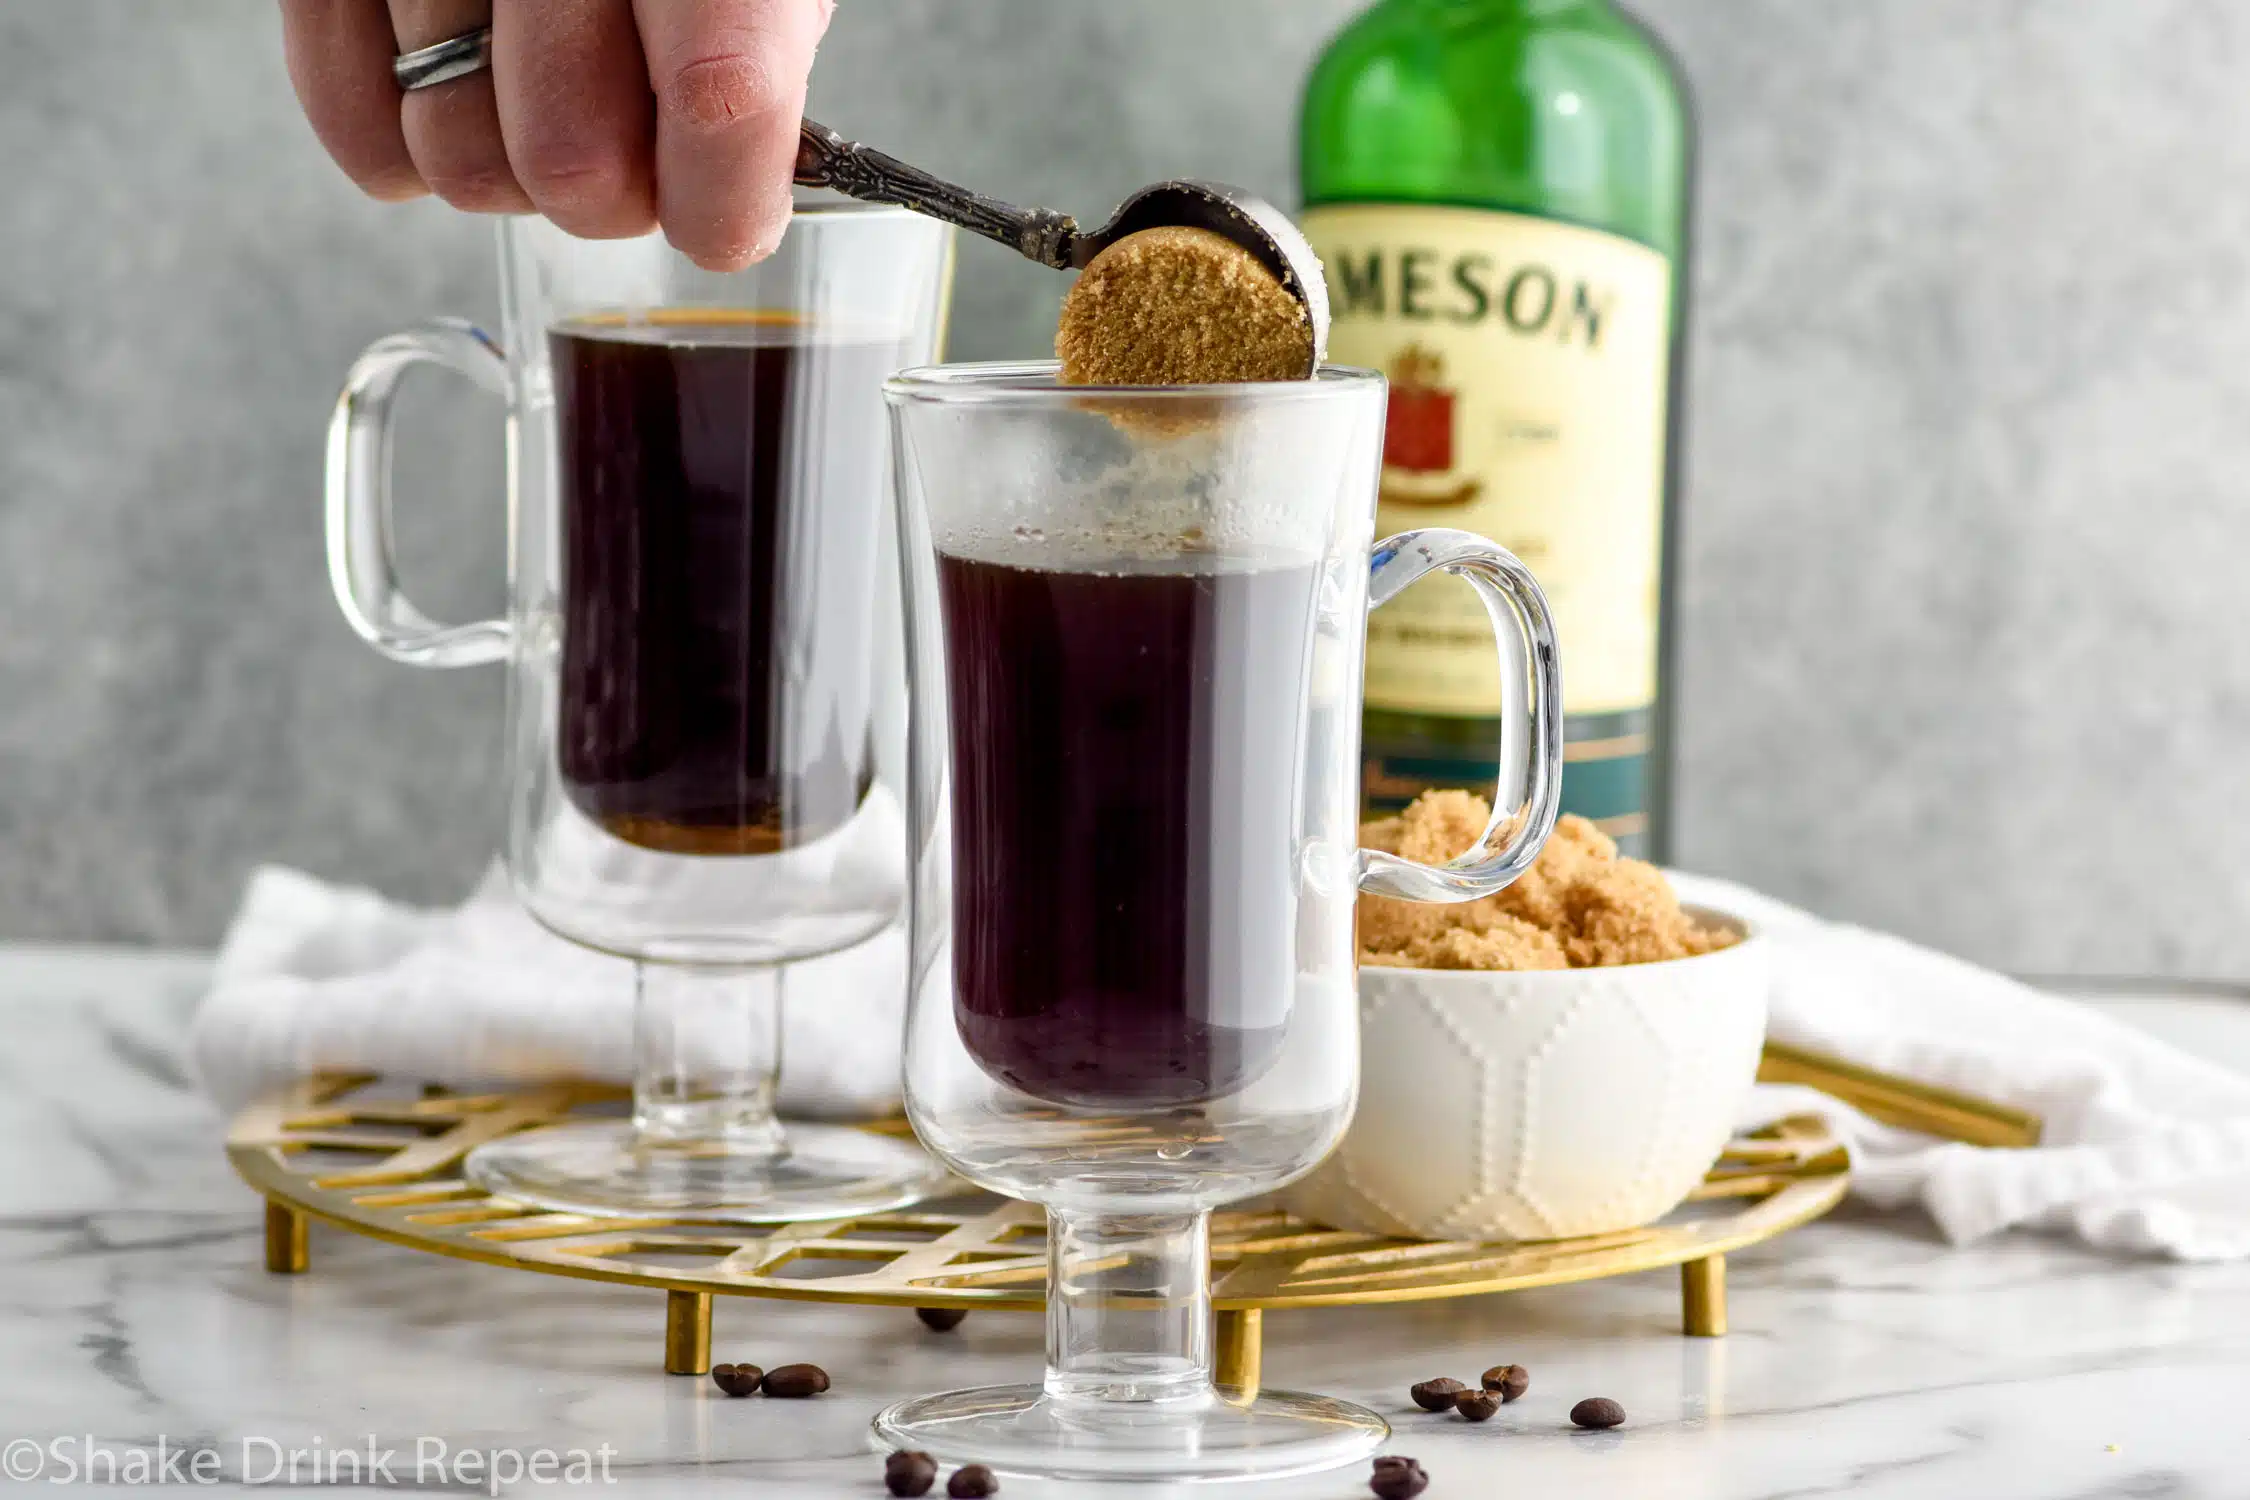 Photo of person's hand spooning brown sugar into mug of coffee for Irish Coffee recipe. Bottle of Jameson Irish Whiskey and a bowl of brown sugar sit on counter behind mugs.